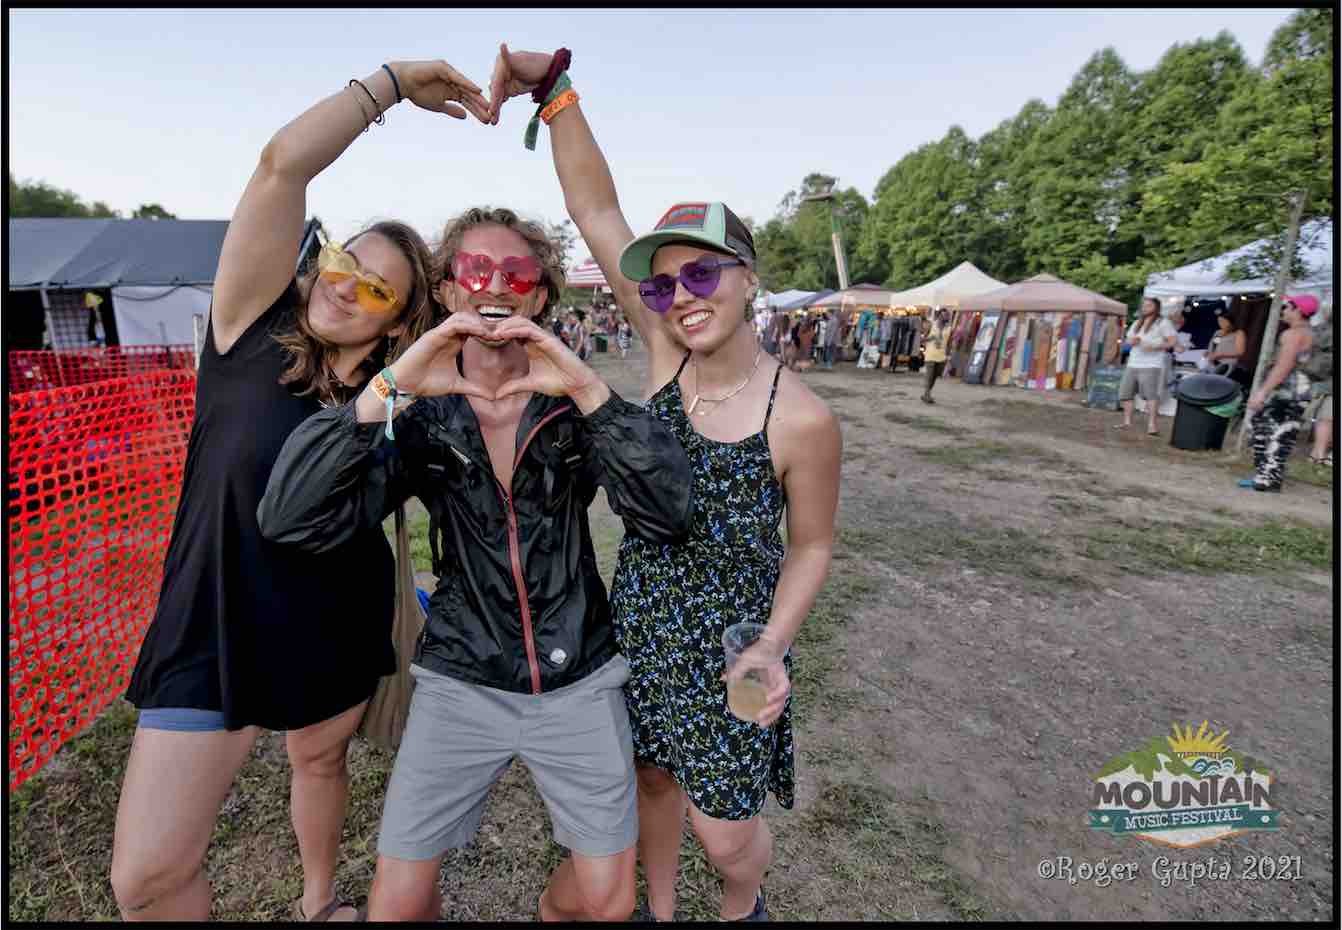 happy fans showing love at mountain music festival 2021